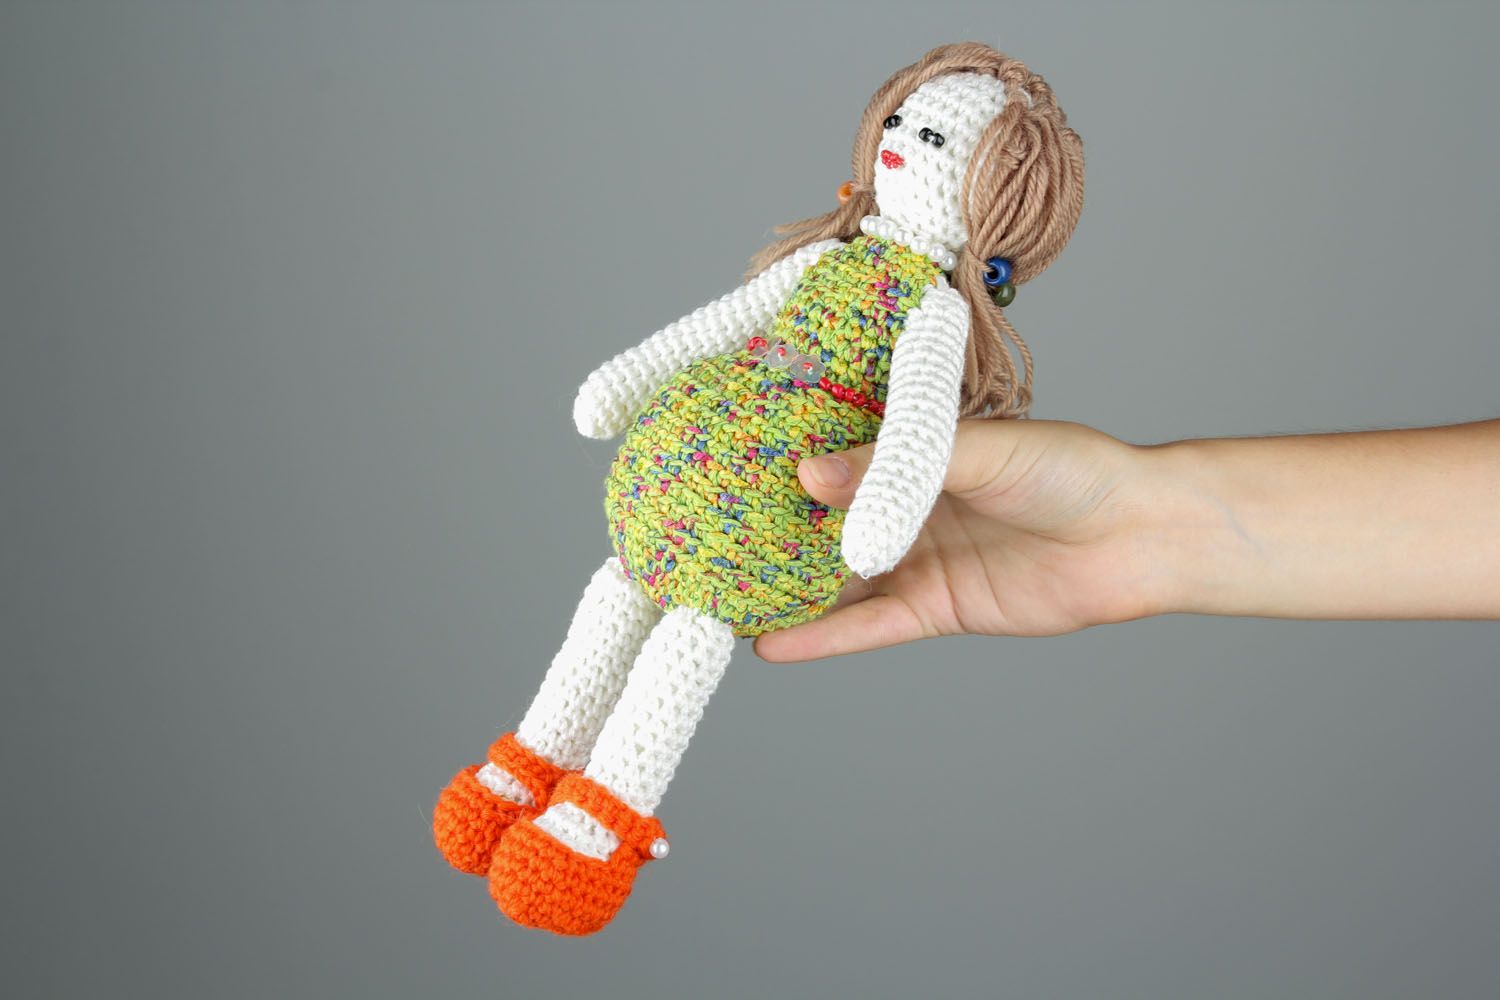 Crocheted author's doll photo 2